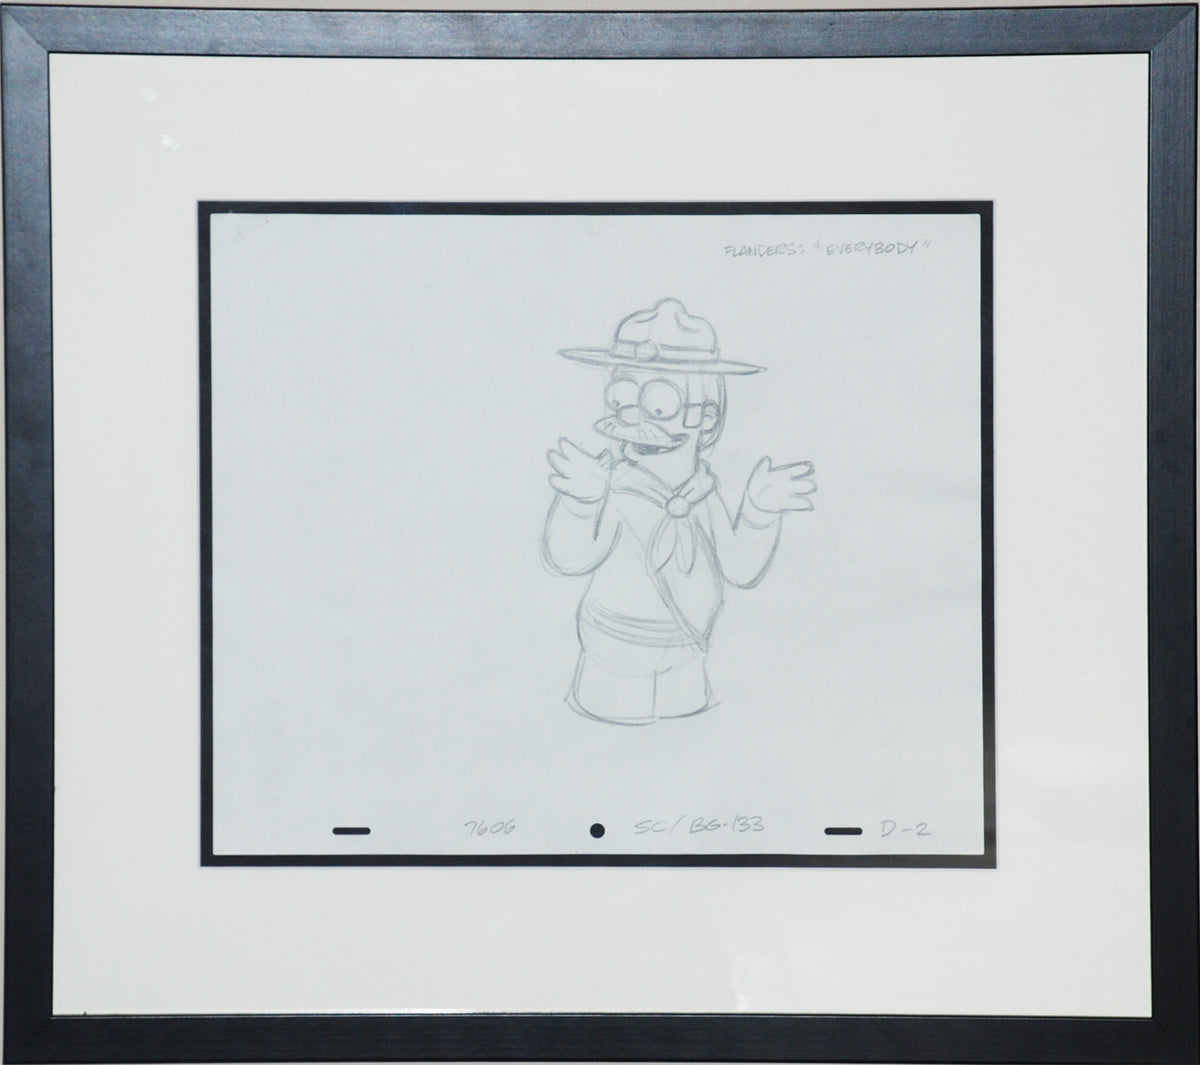 Original Simpsons Production Drawing from The Simpsons featuring Ned Flanders